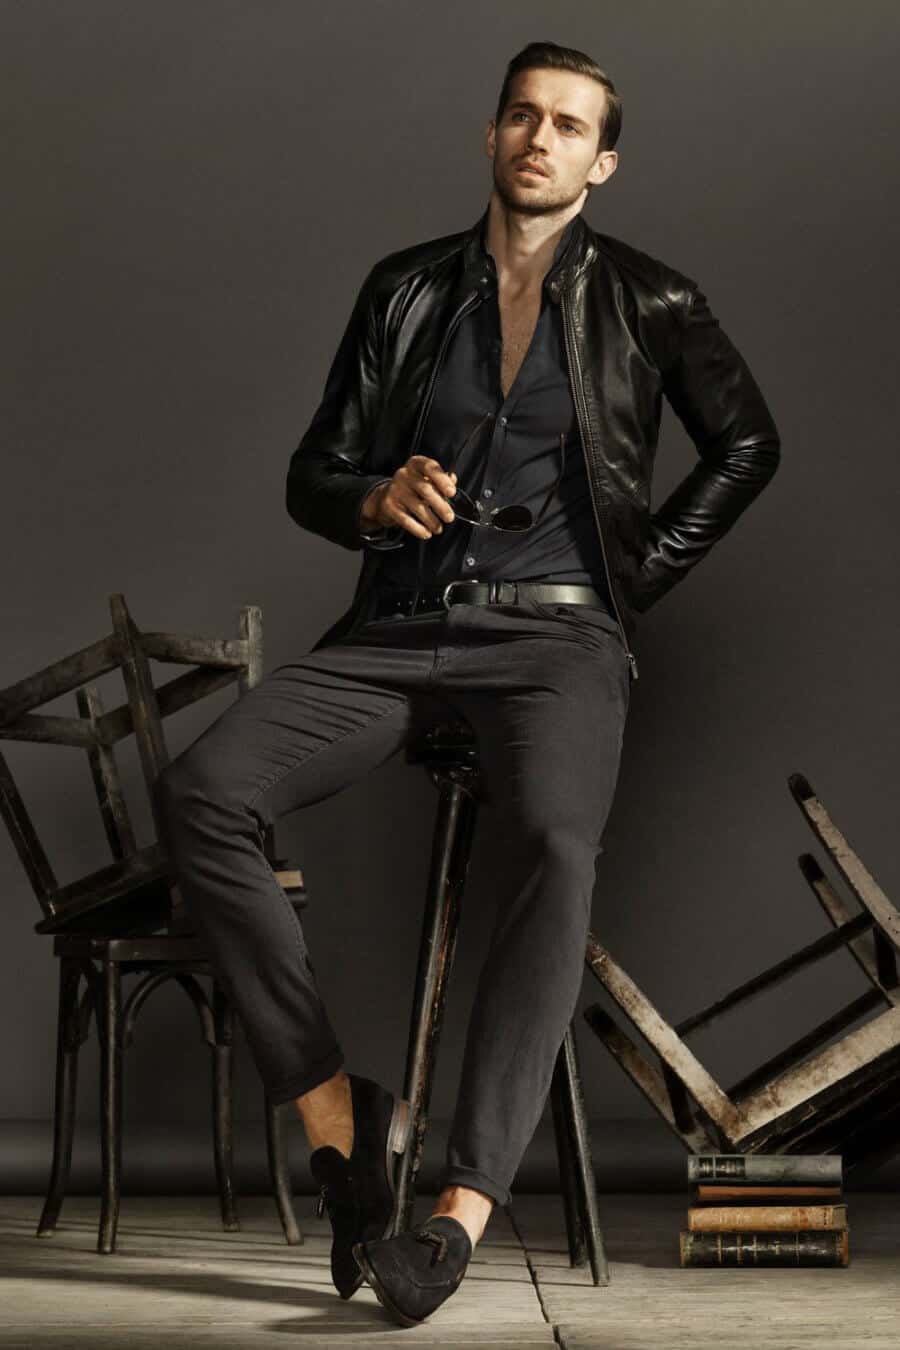 Men's black jeans, shirt, loafers and leather jacket outfit